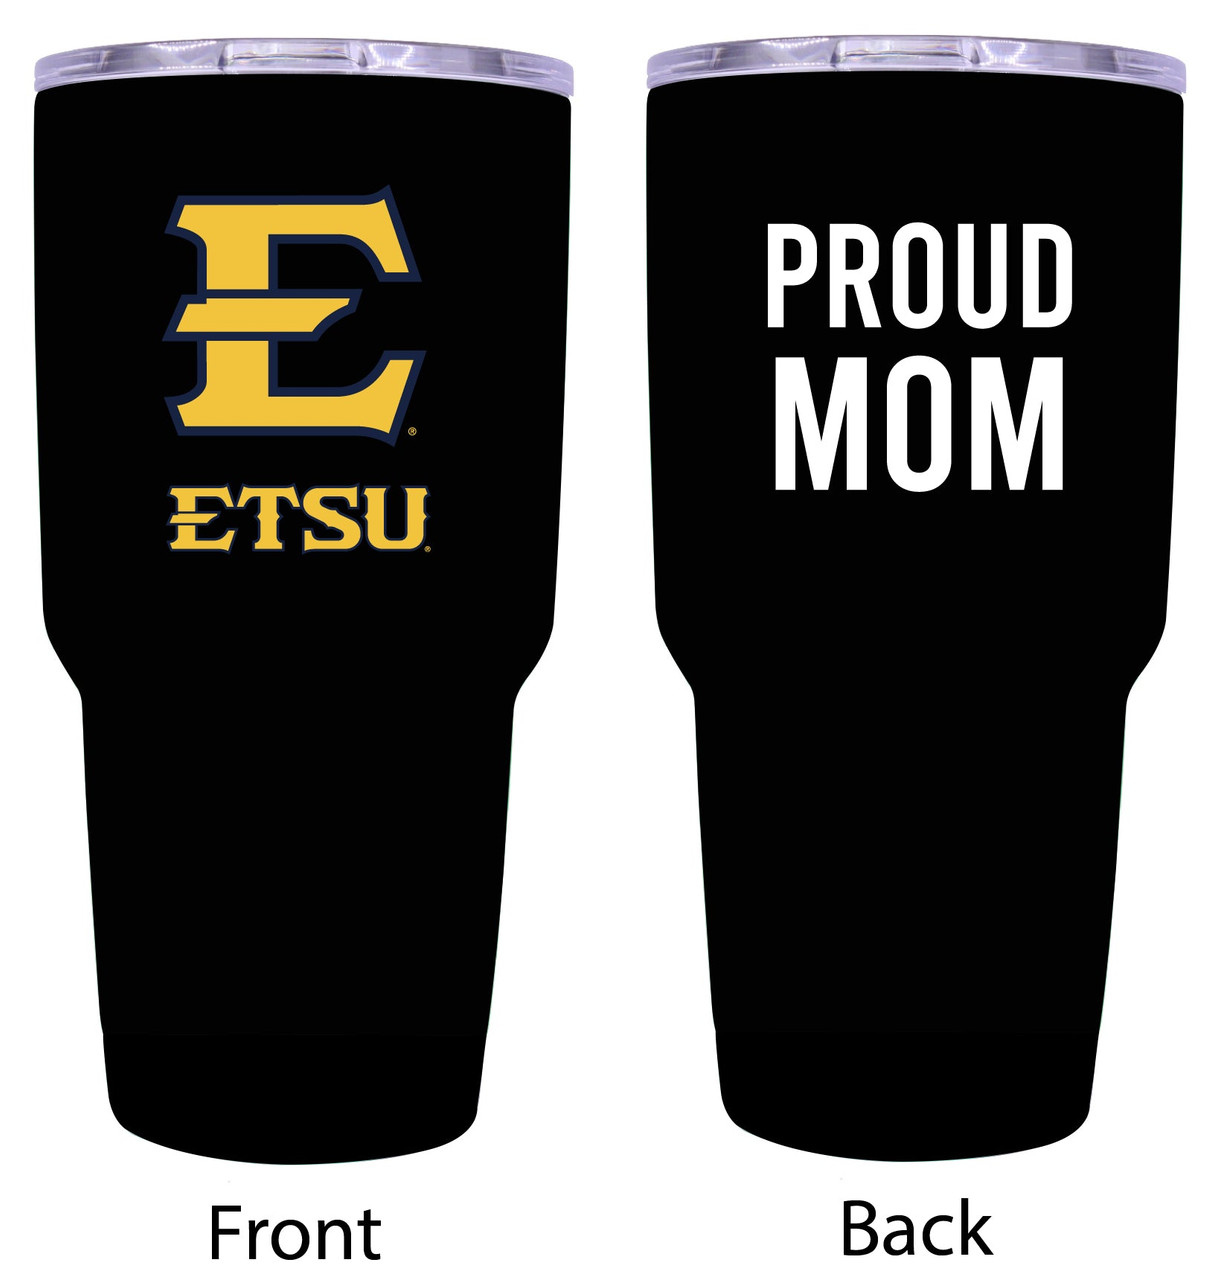 East Tennessee State University Proud MOM Insulated Tumbler